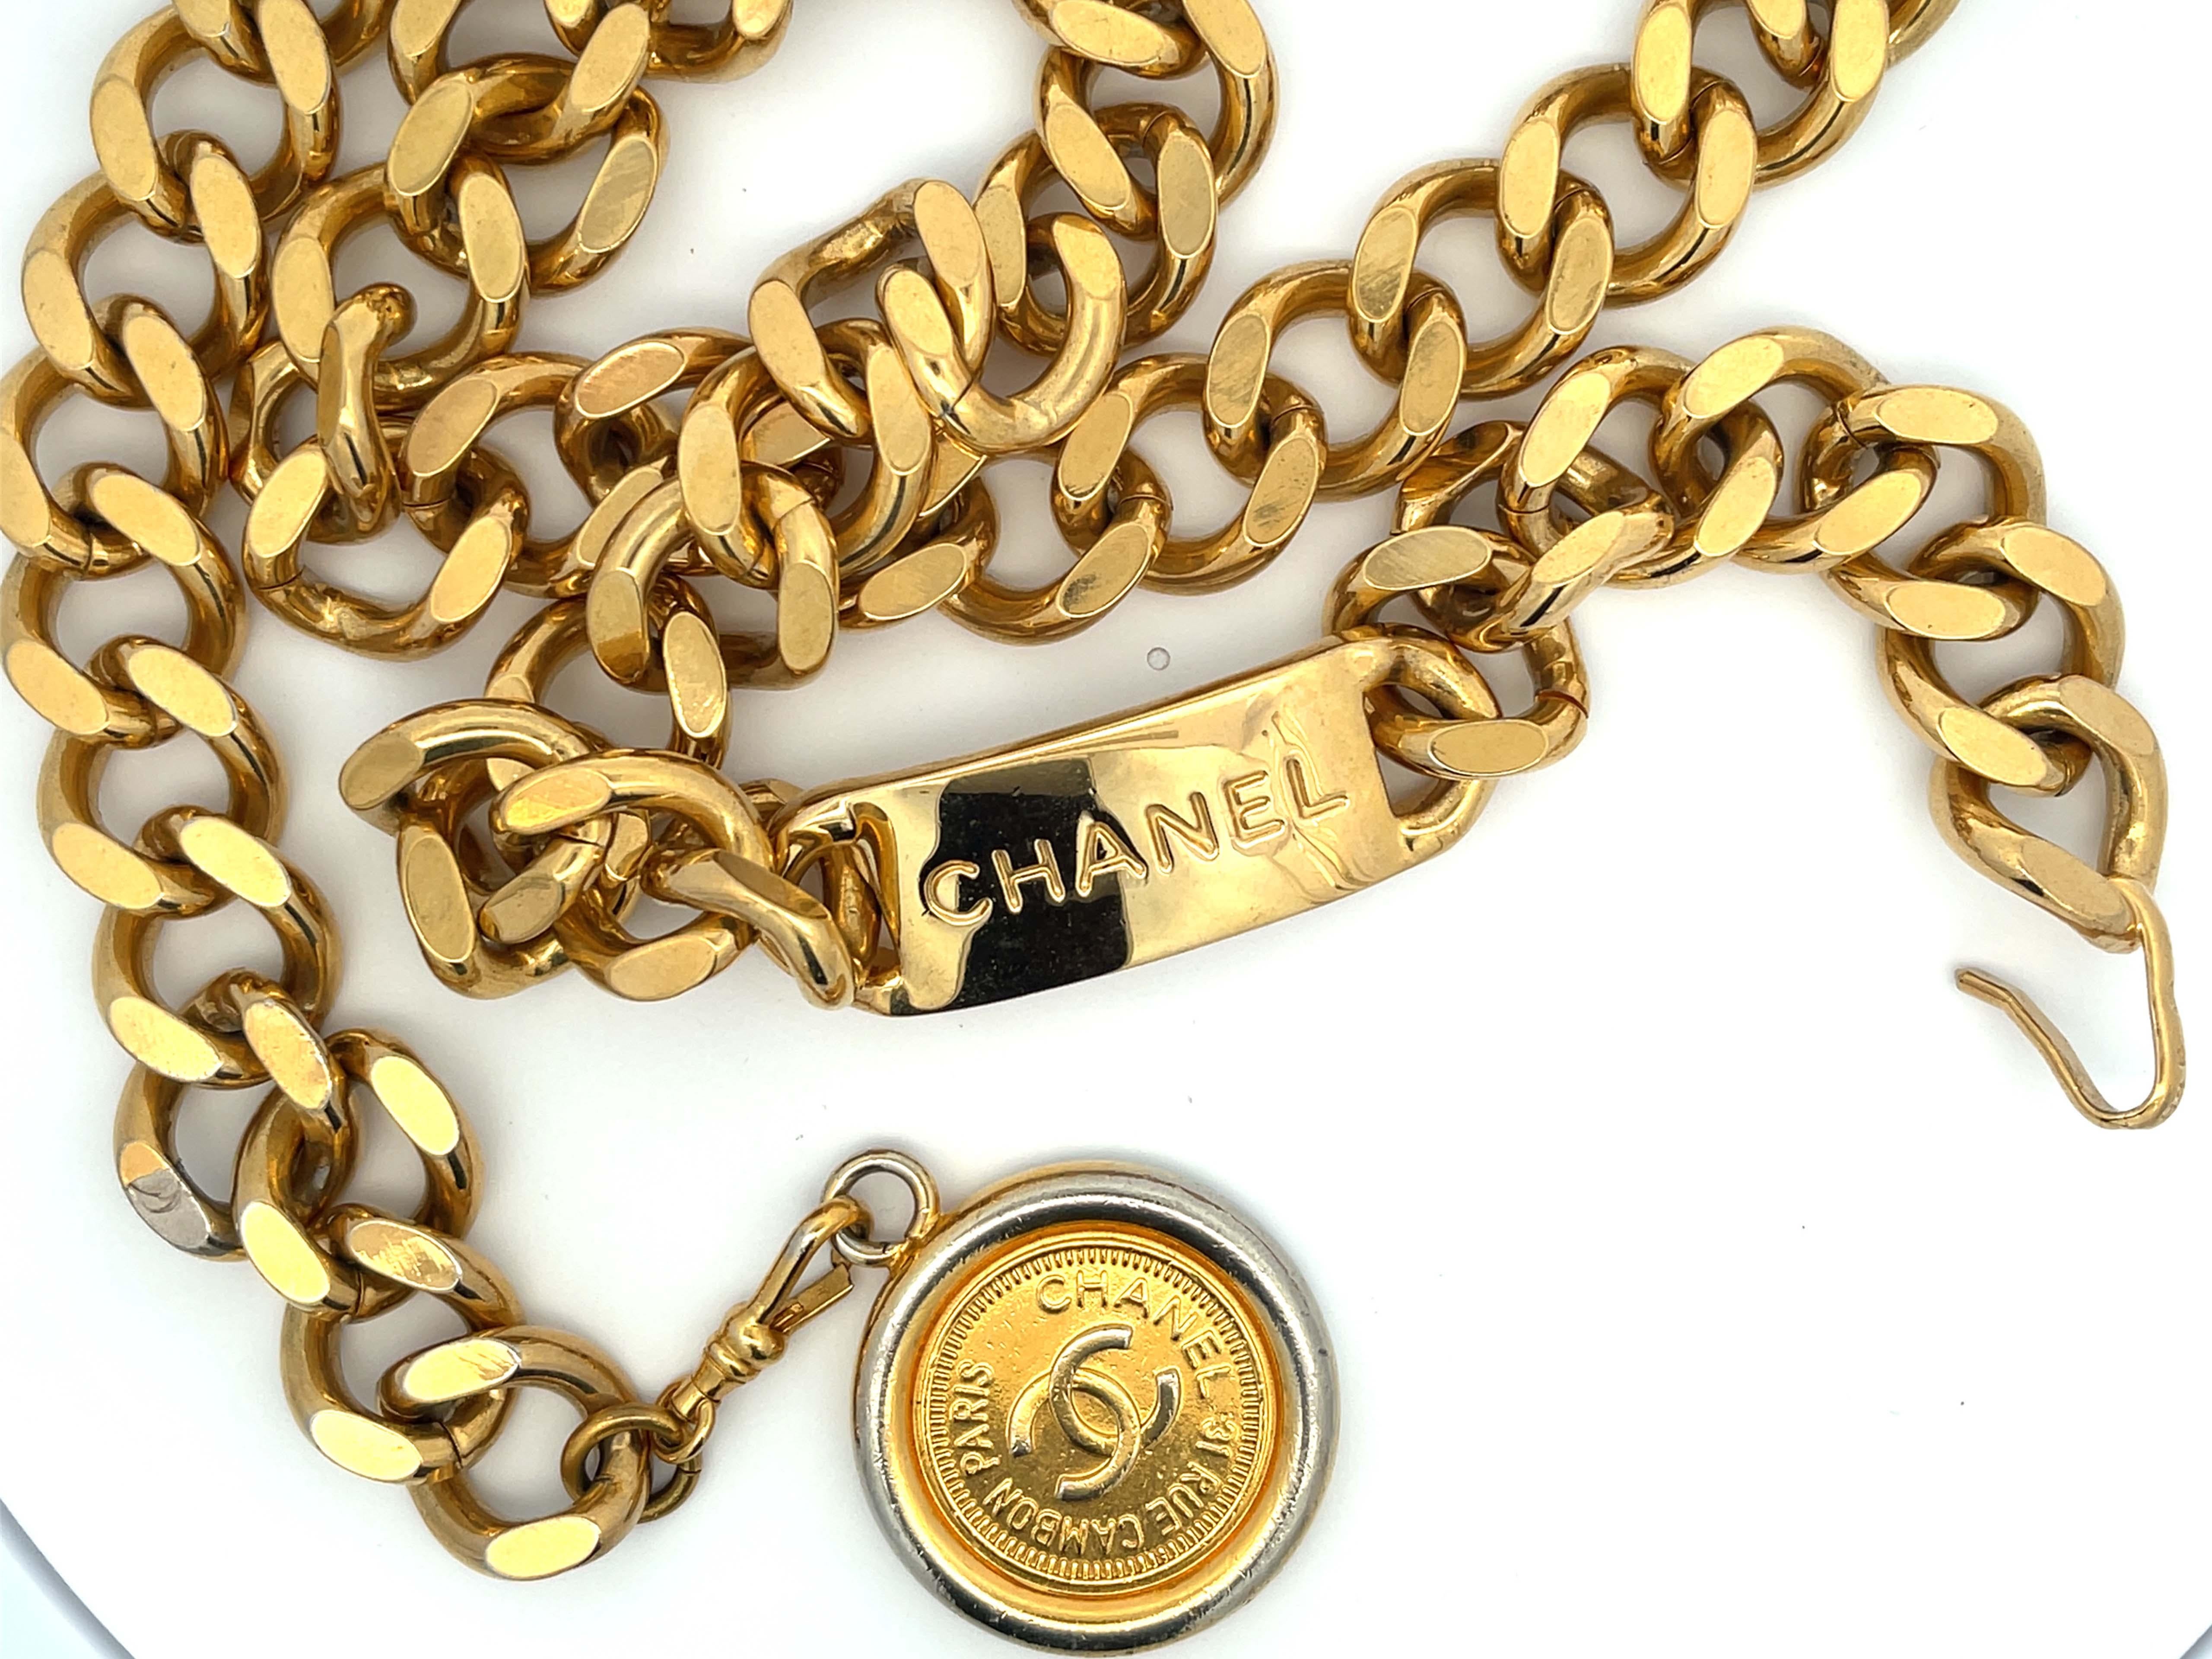 CHANEL Vintage Medallion Coin Chain Belt In Good Condition For Sale In Honolulu, HI